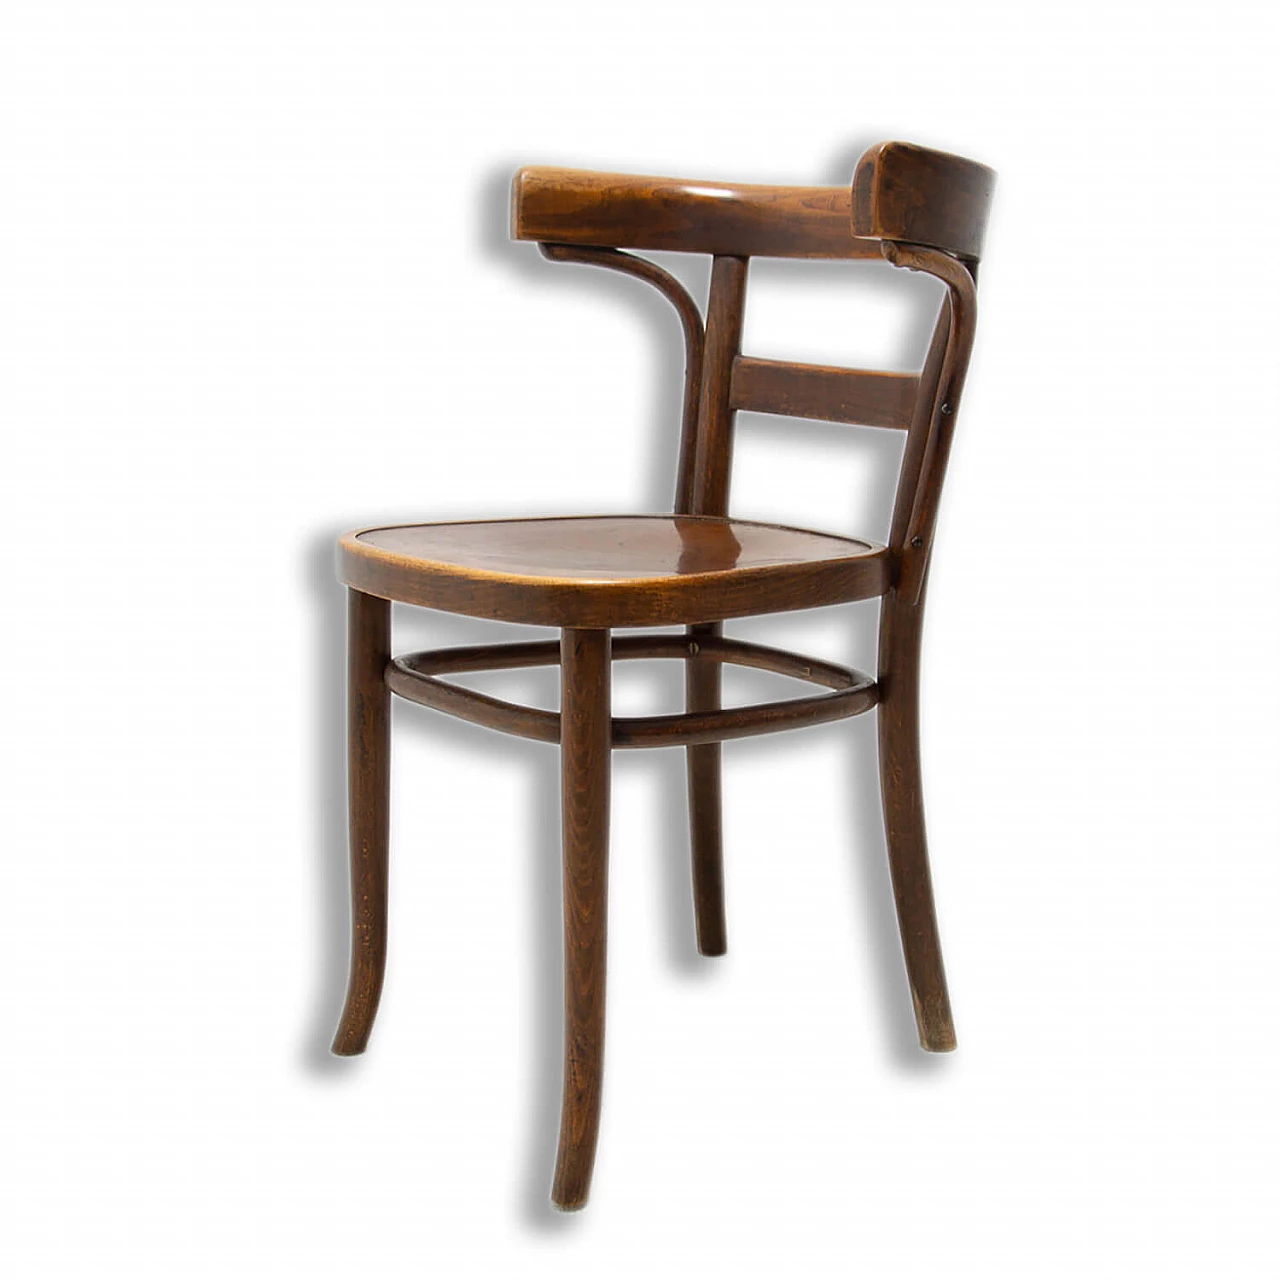 Bentwood chair by Bernkop, 1930s 1353993